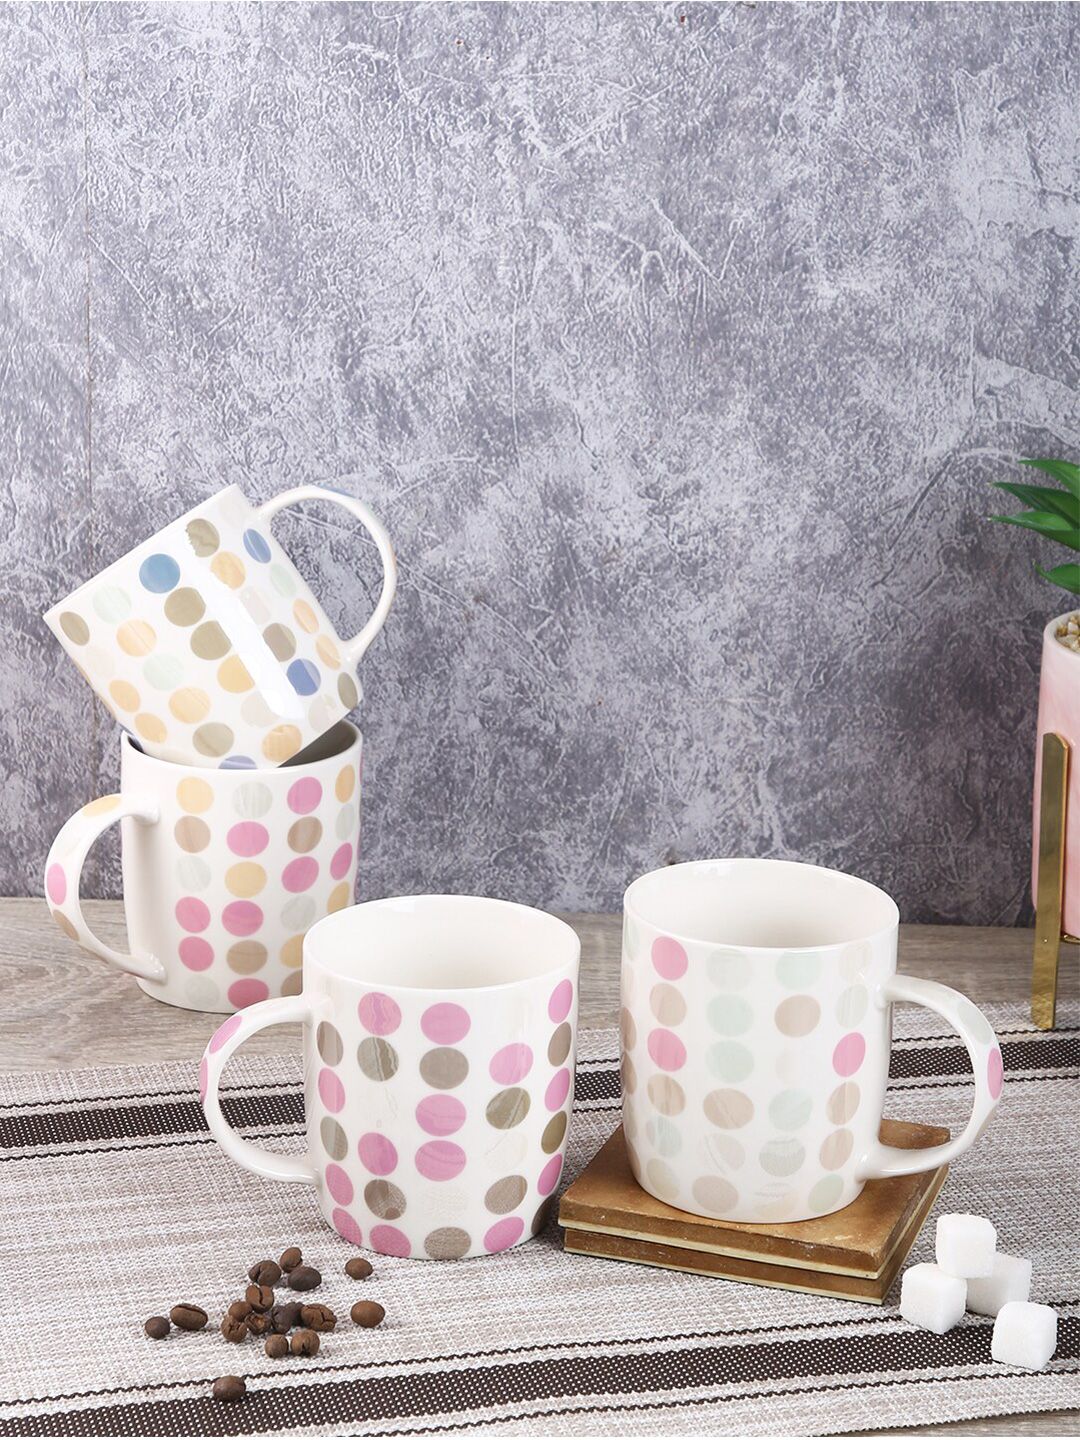 House Of Accessories White & PinkPrinted Ceramic Mugs Set of 4 Price in India